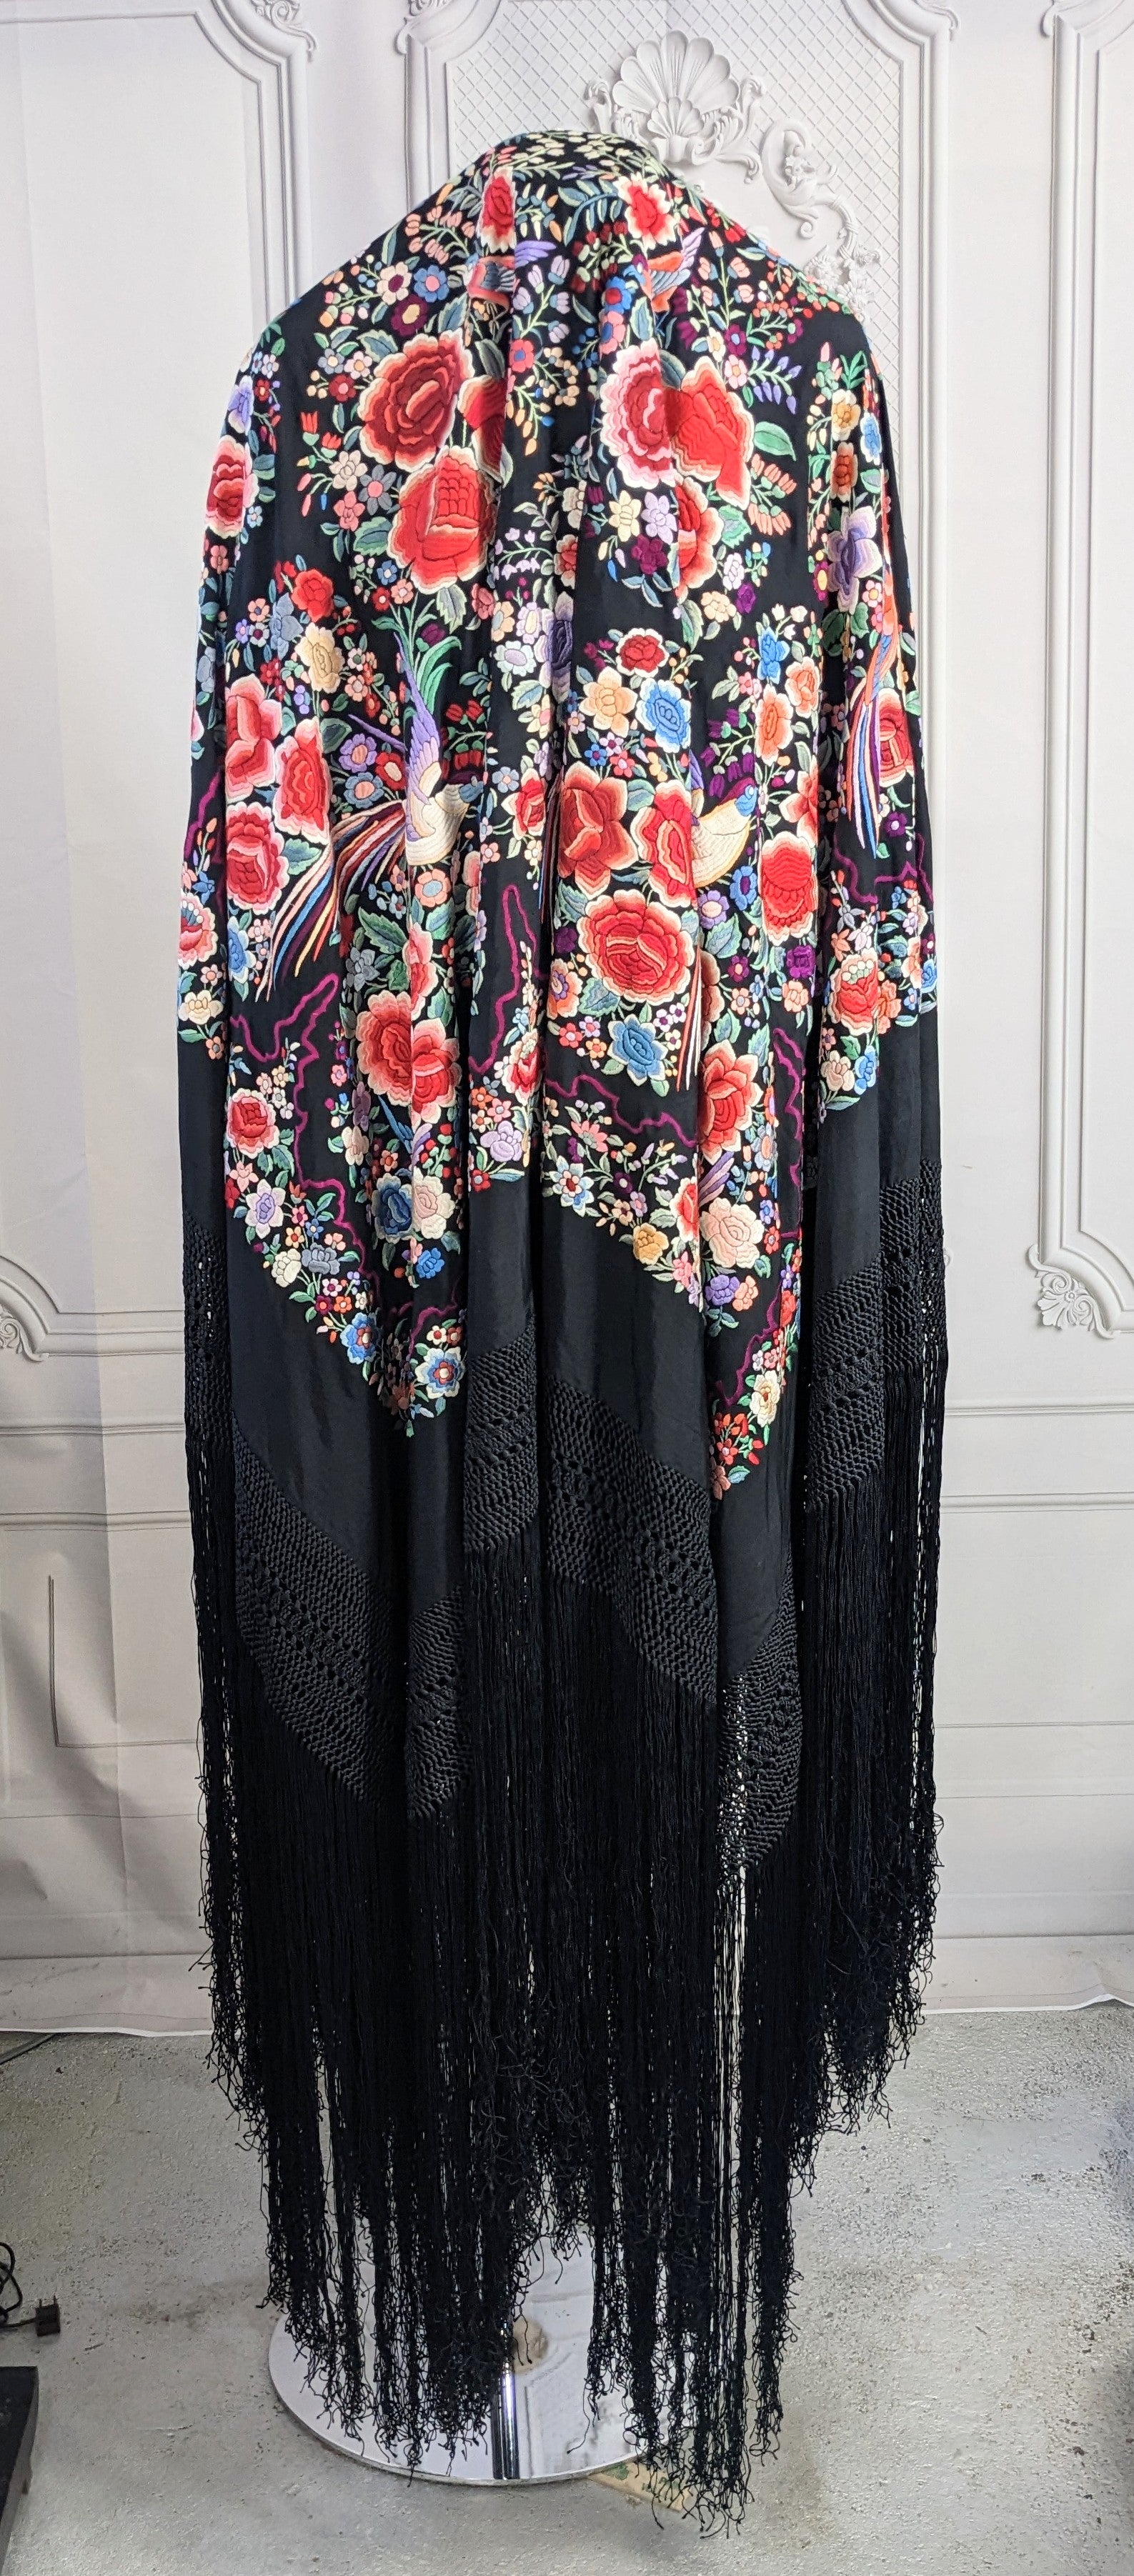 Spectacular Art Deco Flamenco Canton Manton De Manila Hand Embroidered Silk Wedding Piano Shawl.  Huge & Heavy, Hand Embroidered, Vibrant Color on color with floral and bird motifs.  Features outstanding, highly detailed allover motifs hand